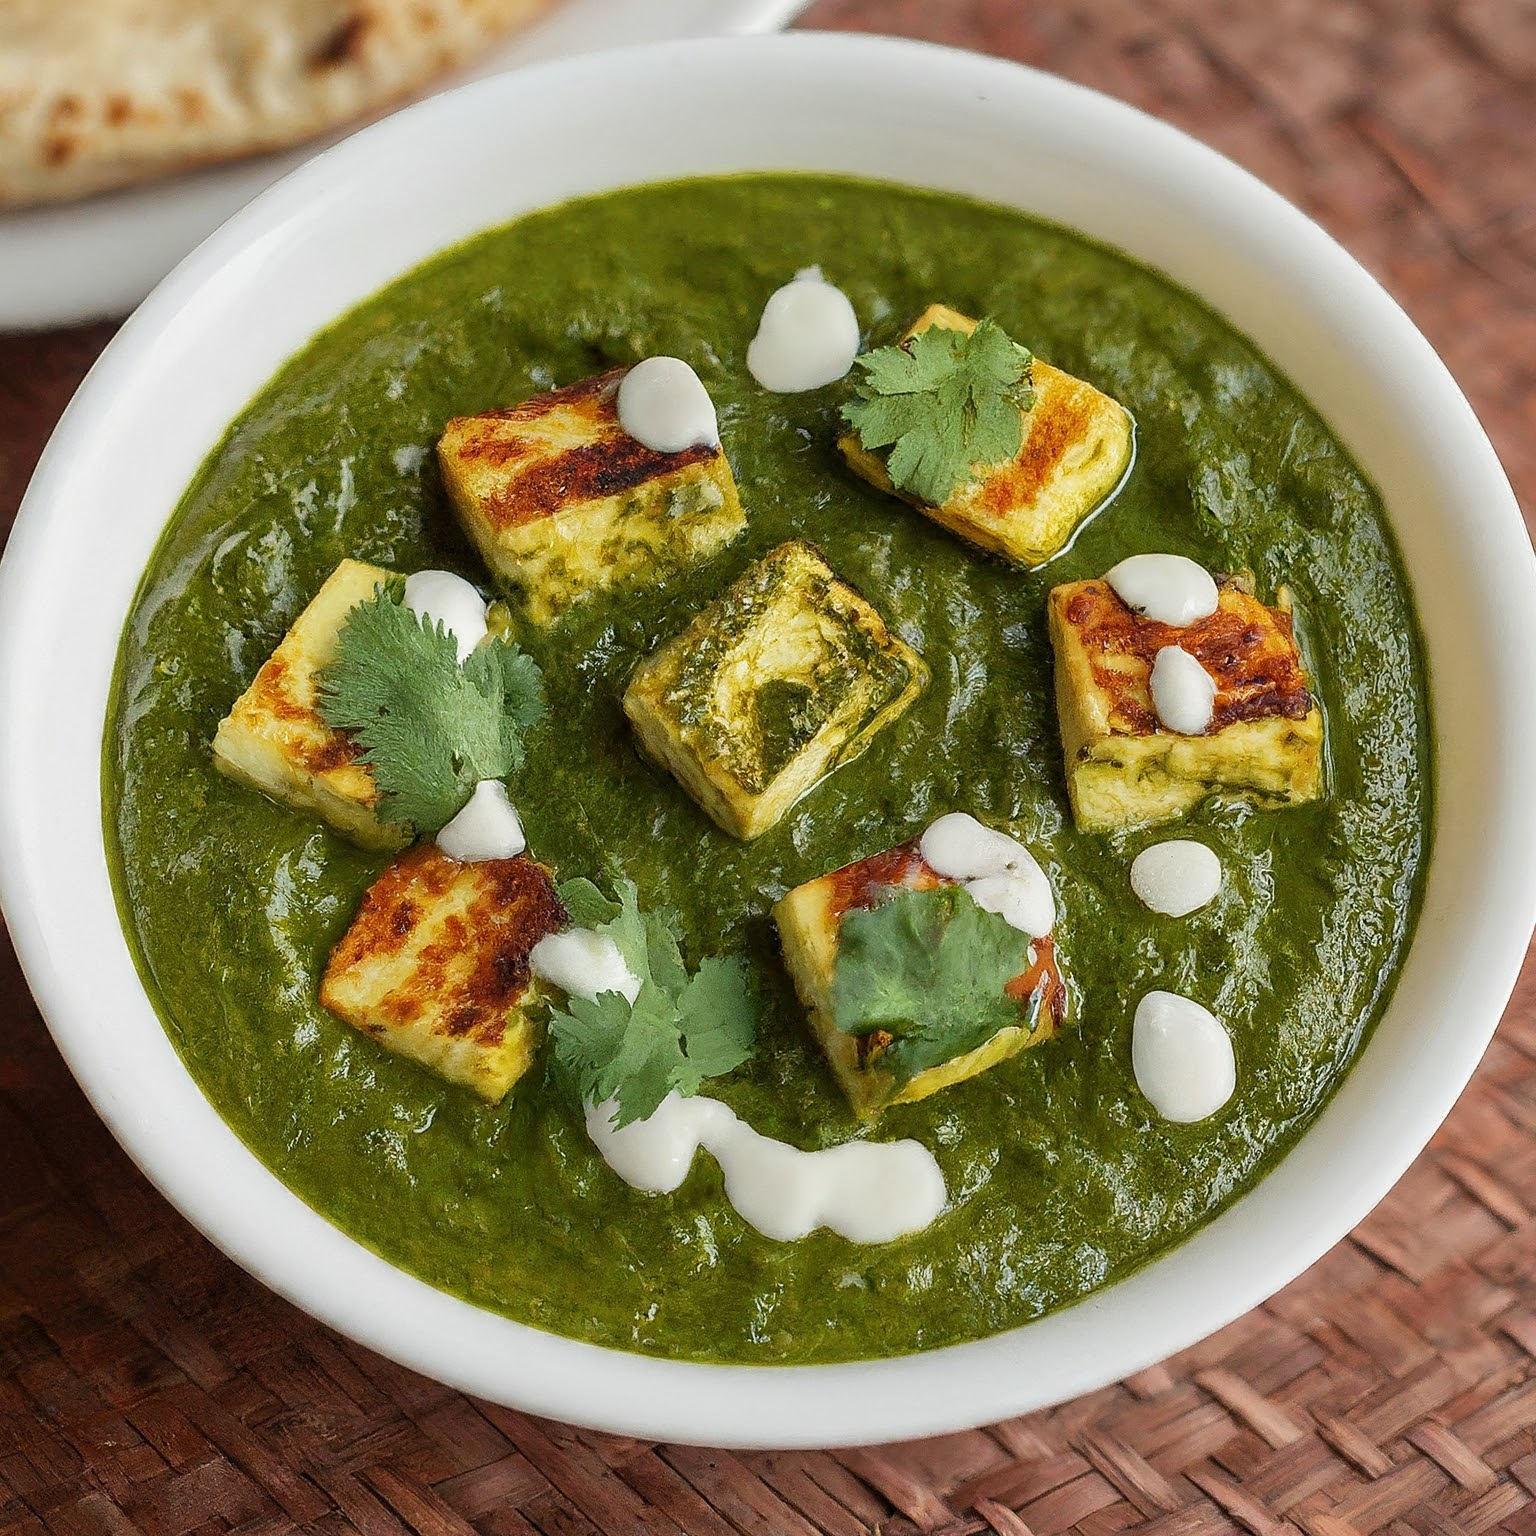 Palak Paneer Restaurant Quality Spinach & Cheese Curry Recipe